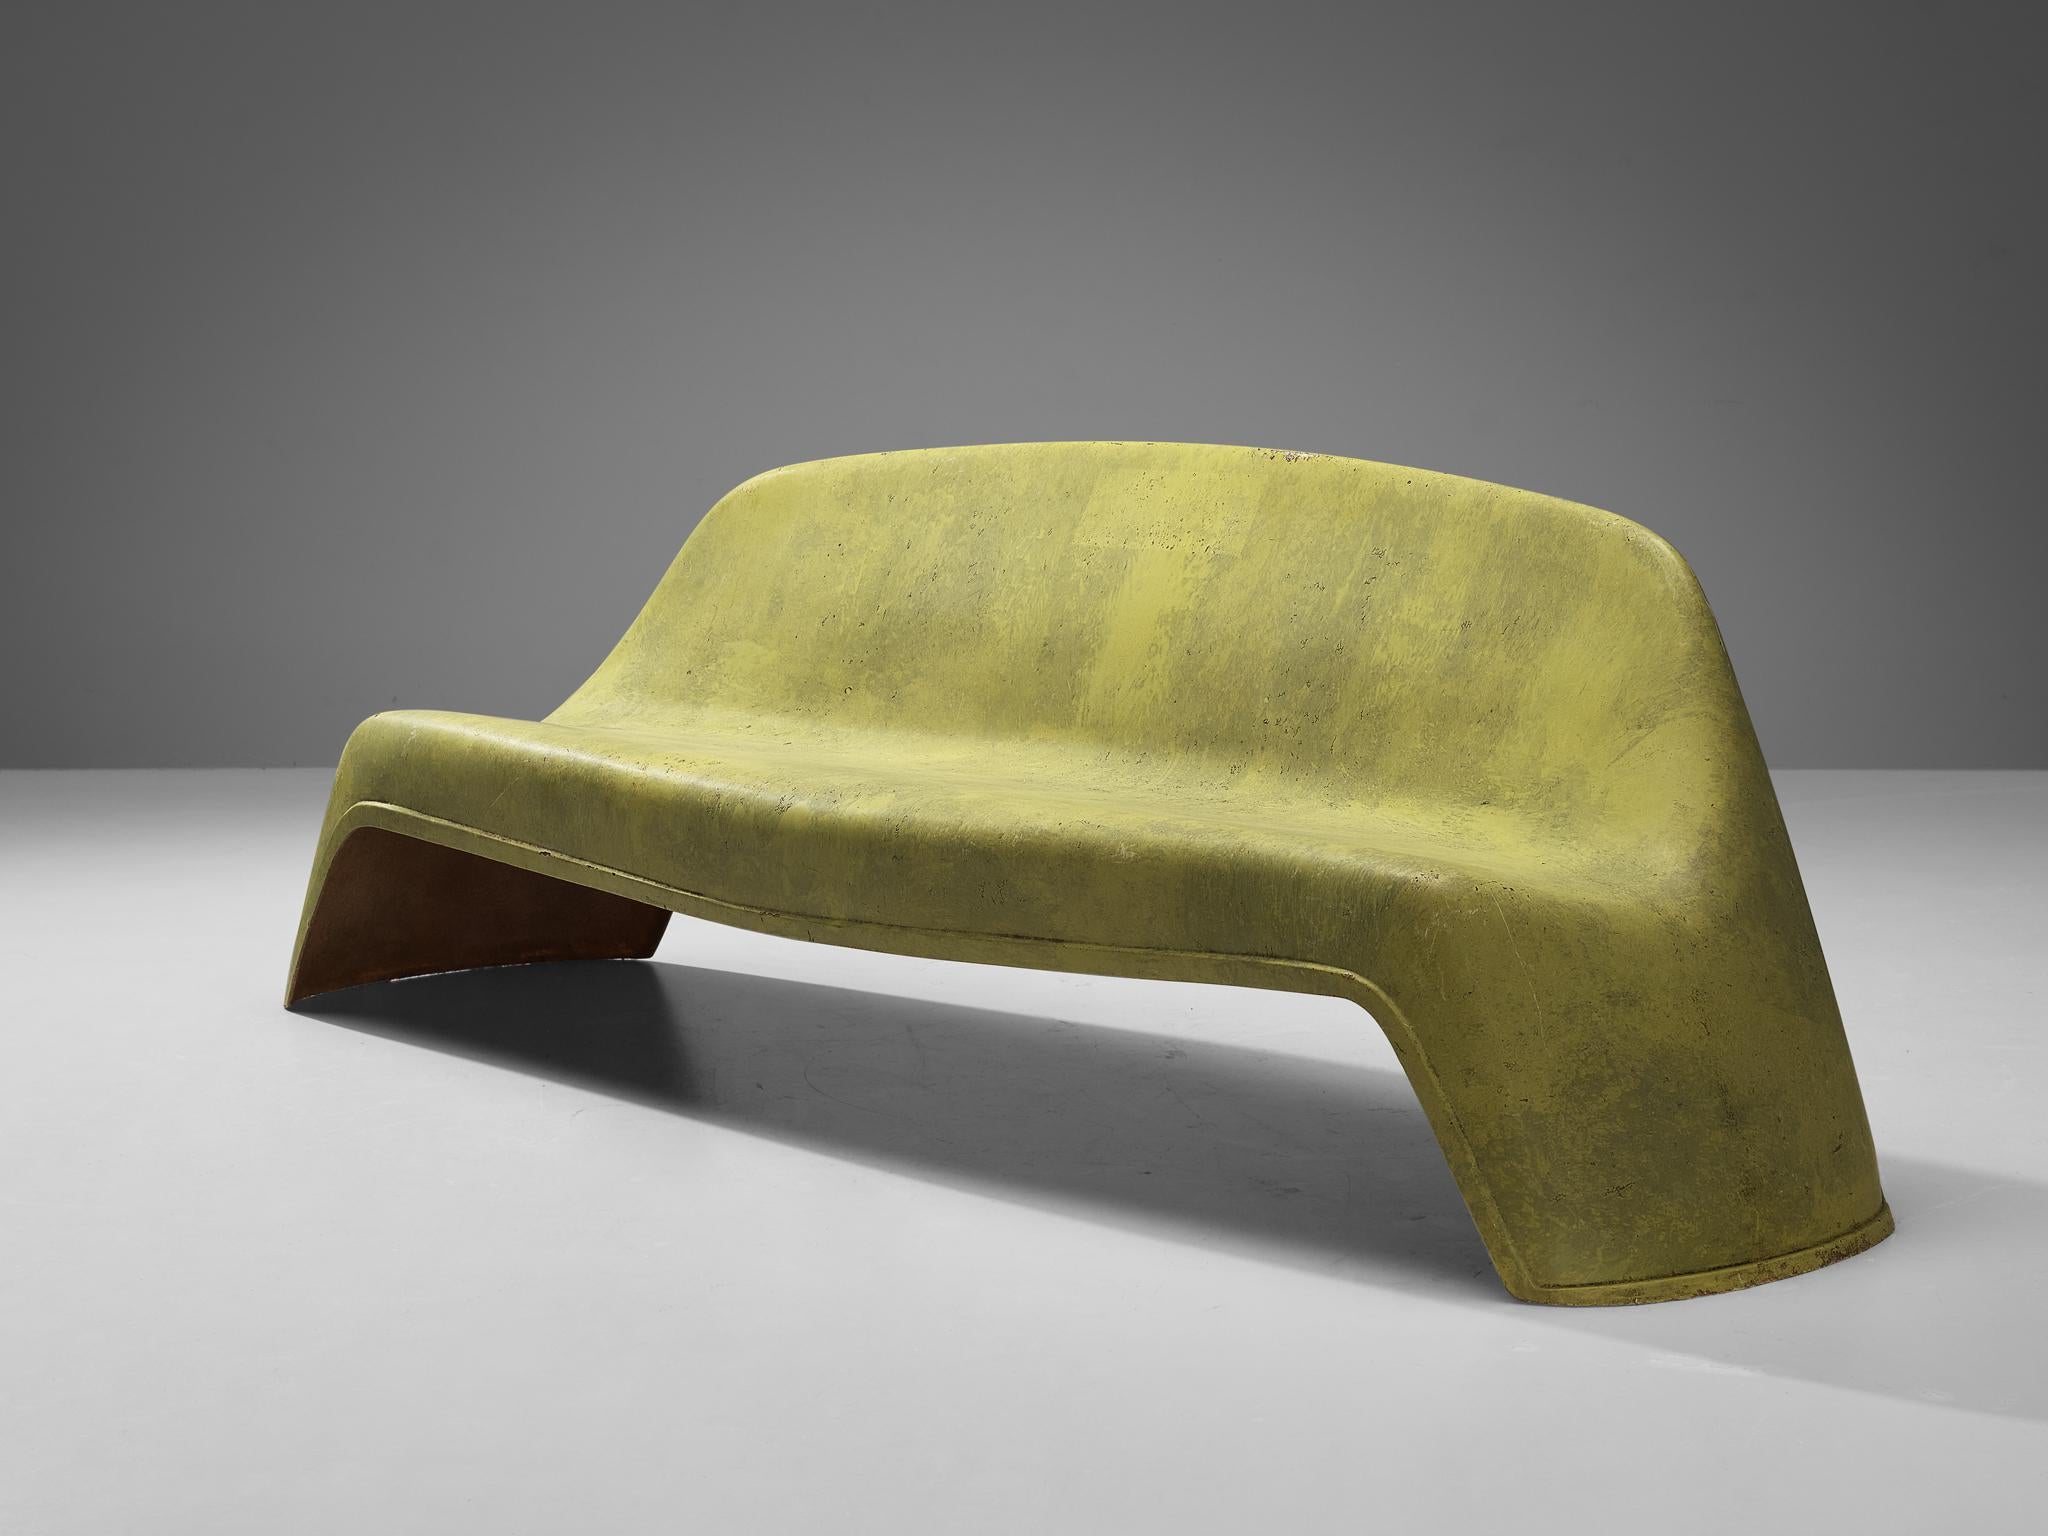 Walter Papst for Wilkhahn, bench, model '1000', fiberglass, Germany, 1970s

This '1000' garden bench is designed by Walter Papst and features an organic-shaped form executed in a vibrant green fiberglass. Owing to its material property, this bench